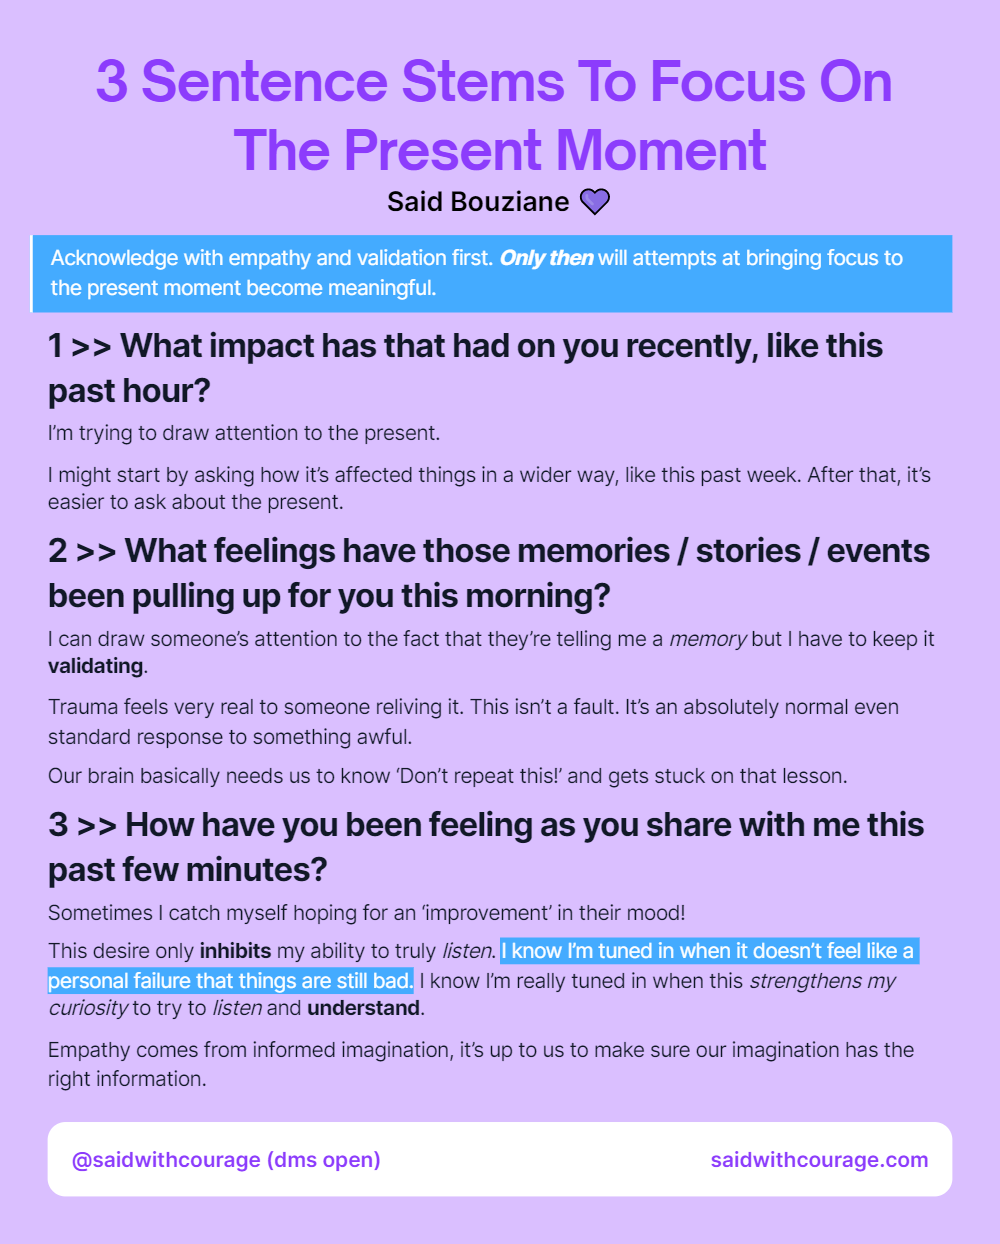 3 Sentence Stems To Bring People To The Present Moment